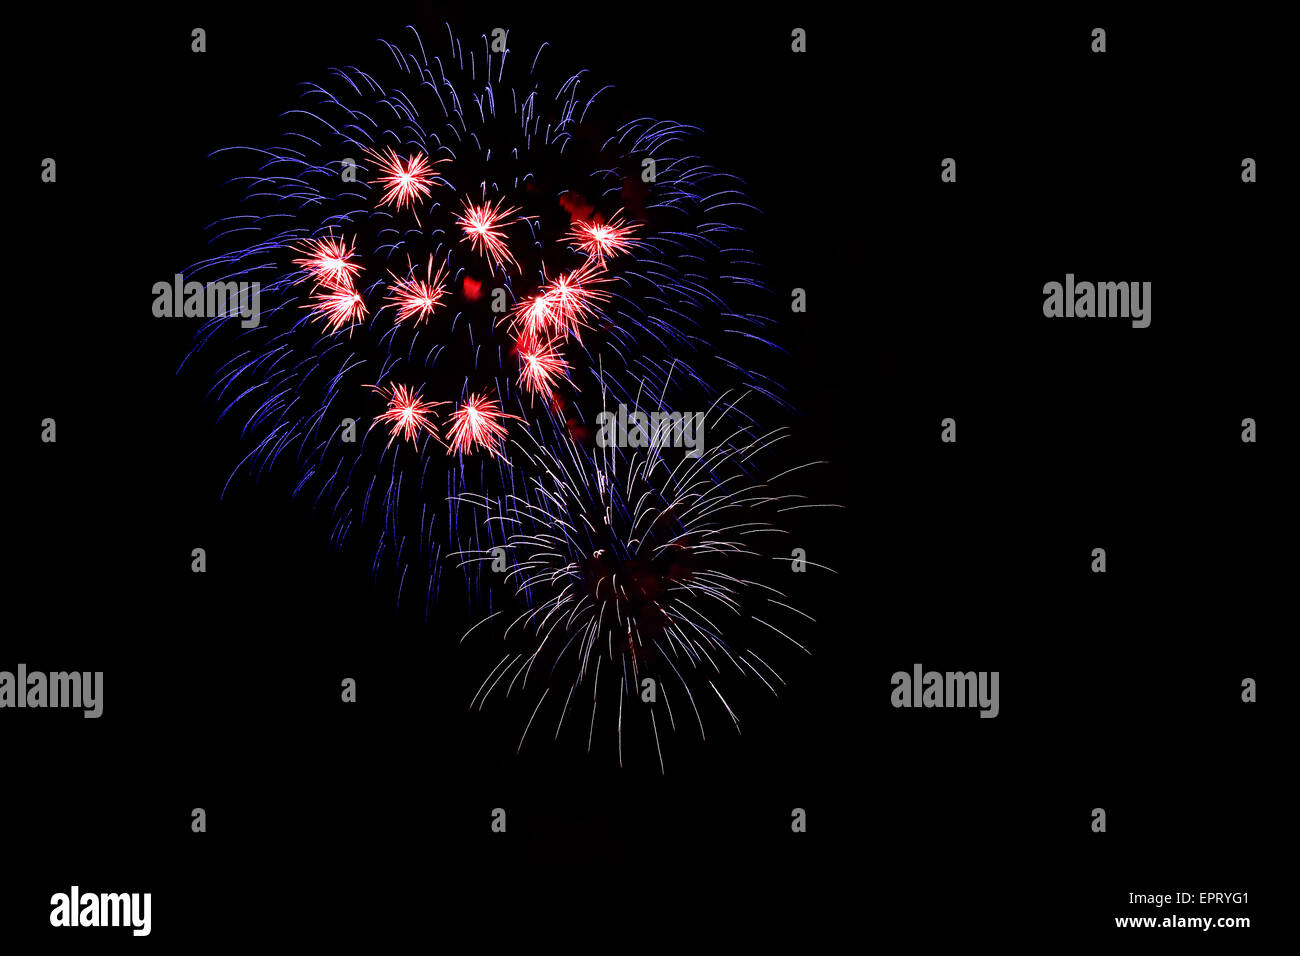 Firework displays in red, blue and white colors on dark background, great symbol for national colors of USA and France. Stock Photo